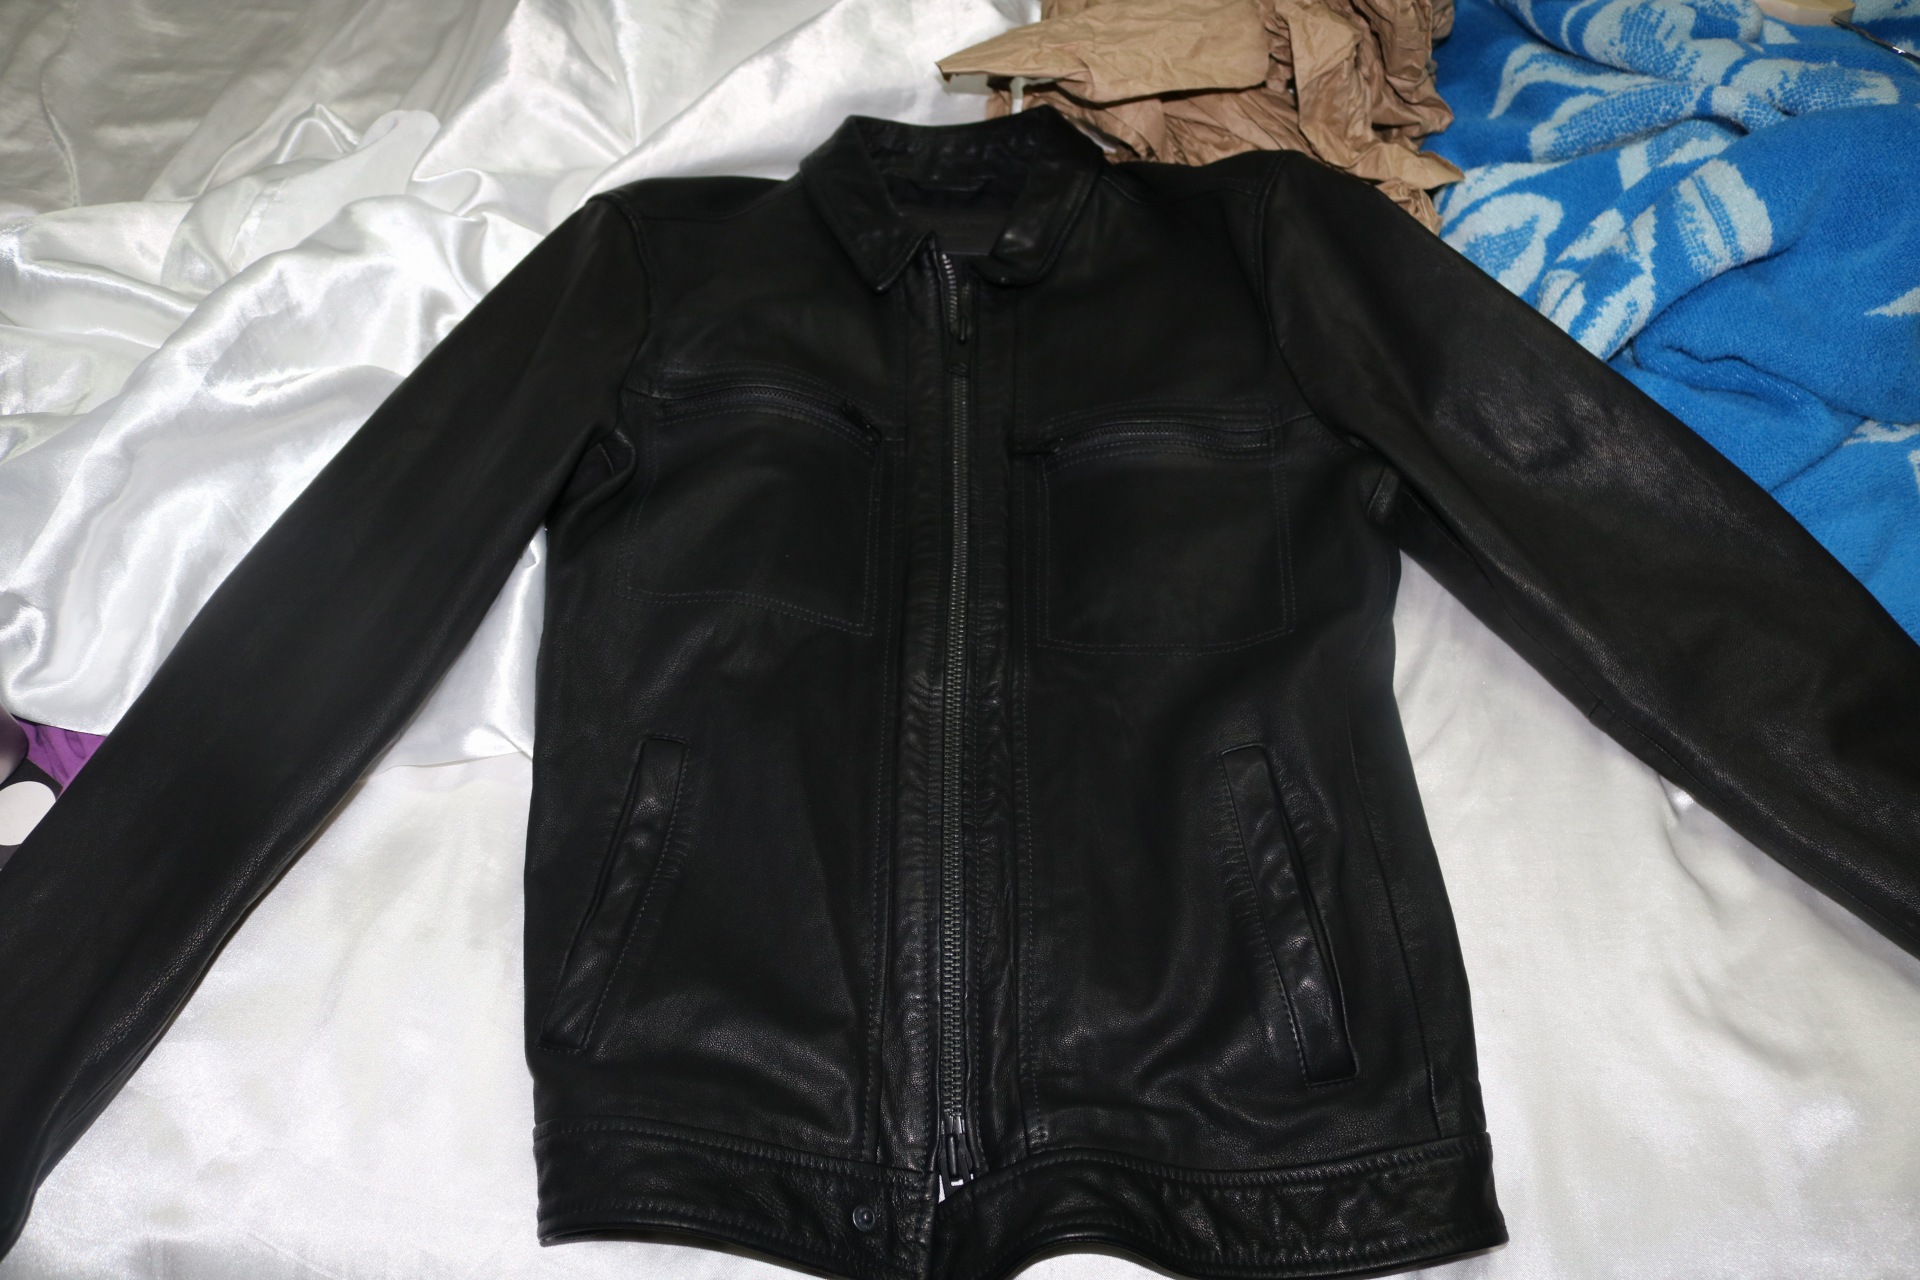 Do I need to clean my leather jacket? | Vintage Leather Jackets Forum